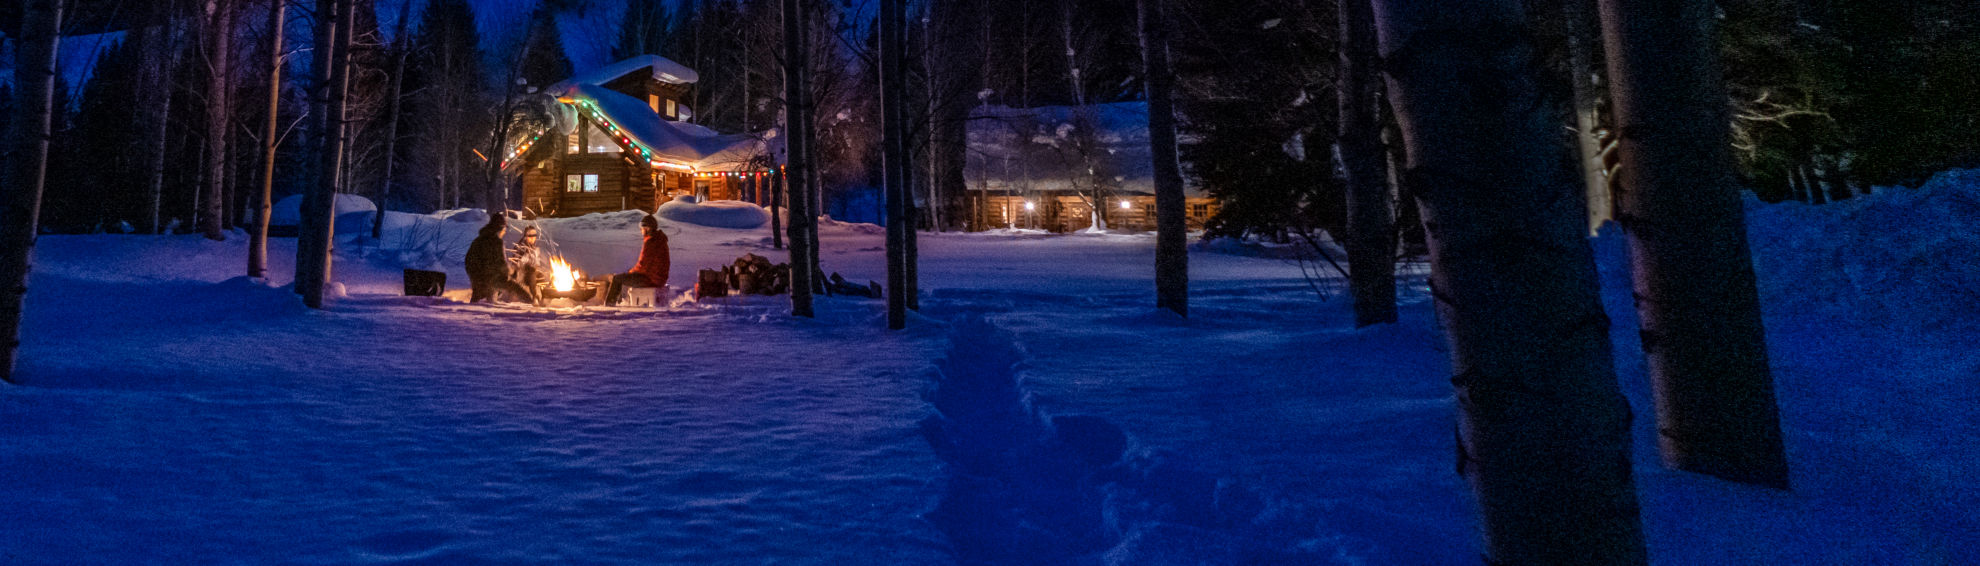 A lodge at night covered in a blanket of snow with holiday lights as trim in back of a group of people by a bonfire.